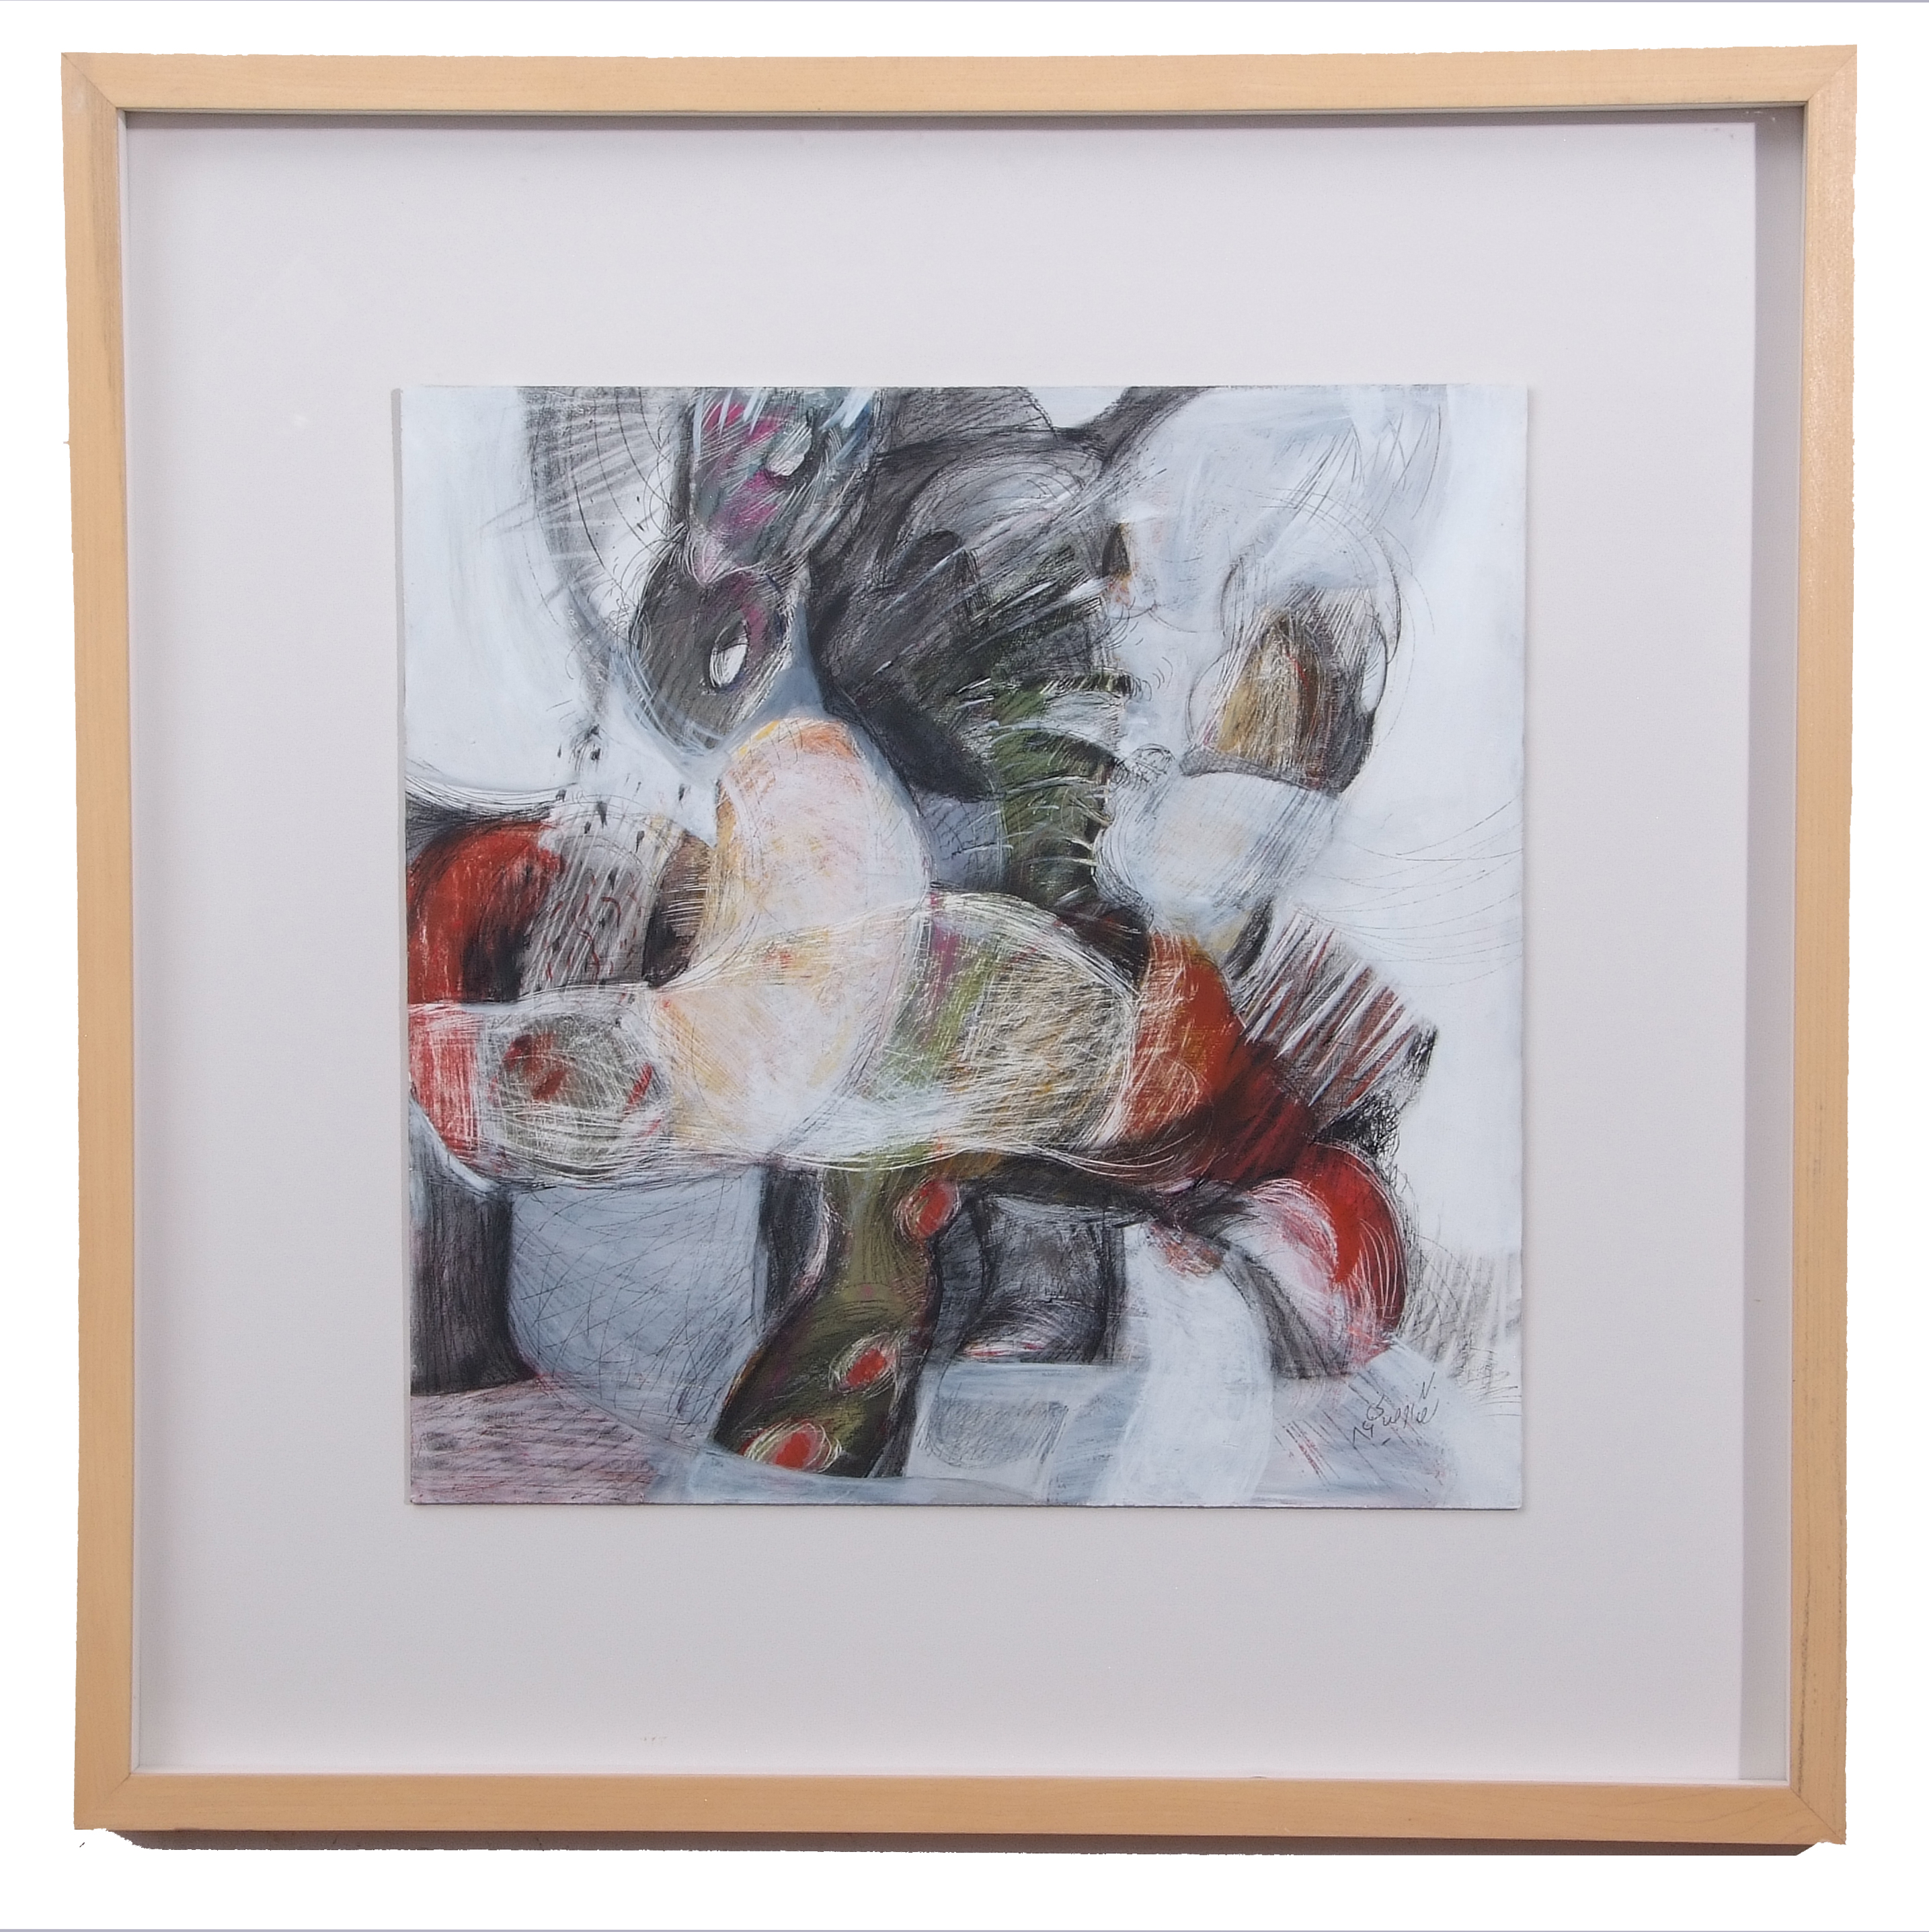 AR Negar Faragiani (born 1977), Abstract composition, mixed media, signed lower right, 40 x 40cm